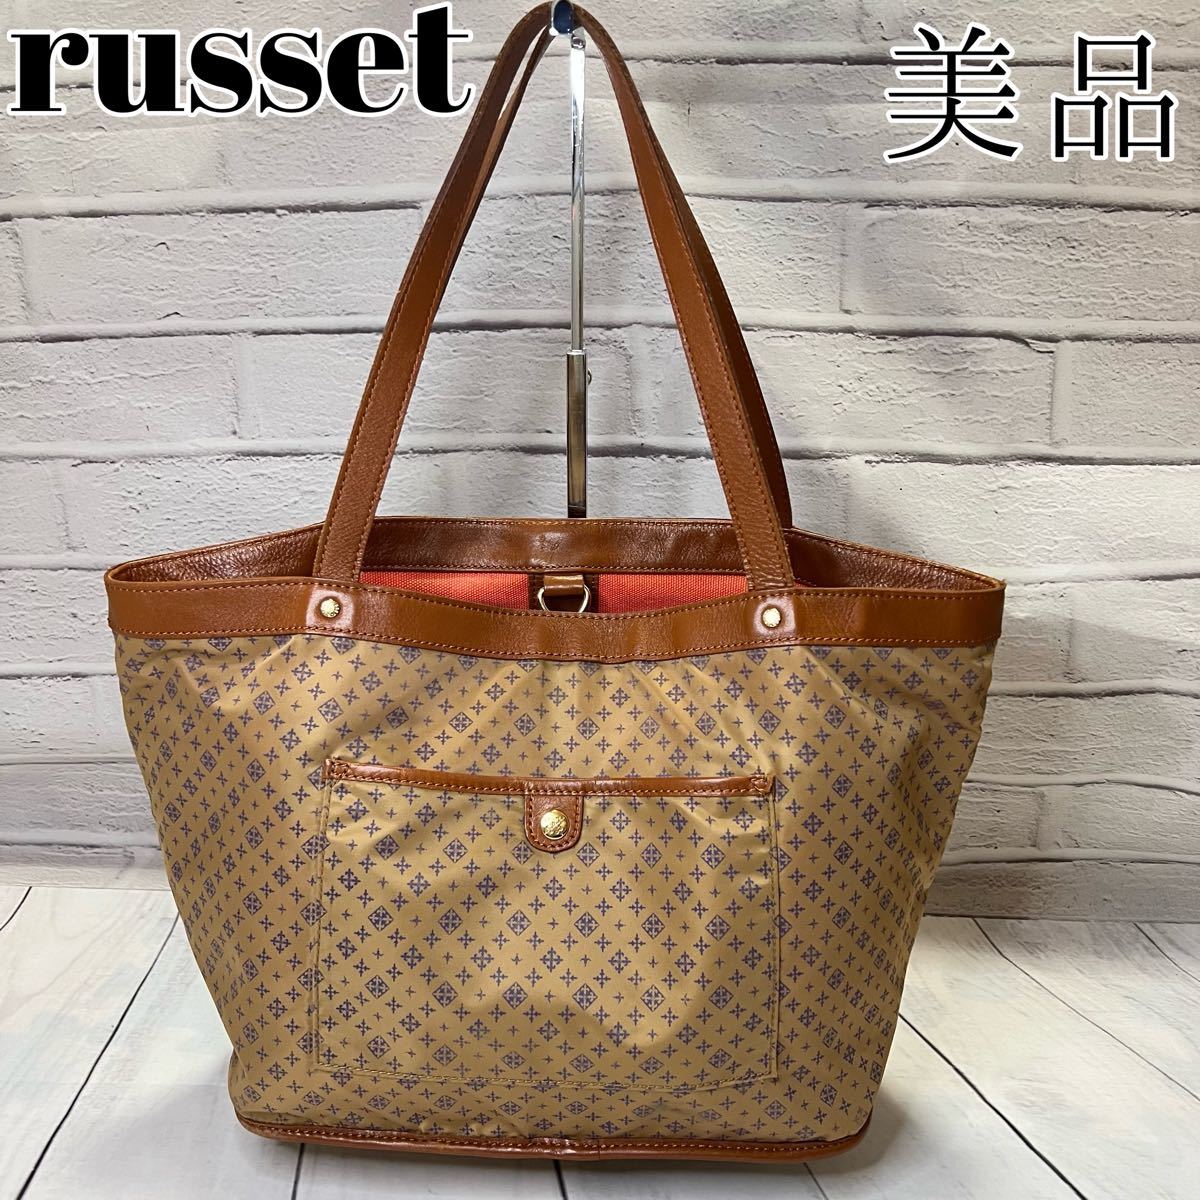 PayPayフリマ｜【美品】russet ラシットトートバッグ ナイロンバッグ 総柄 A4収納可能